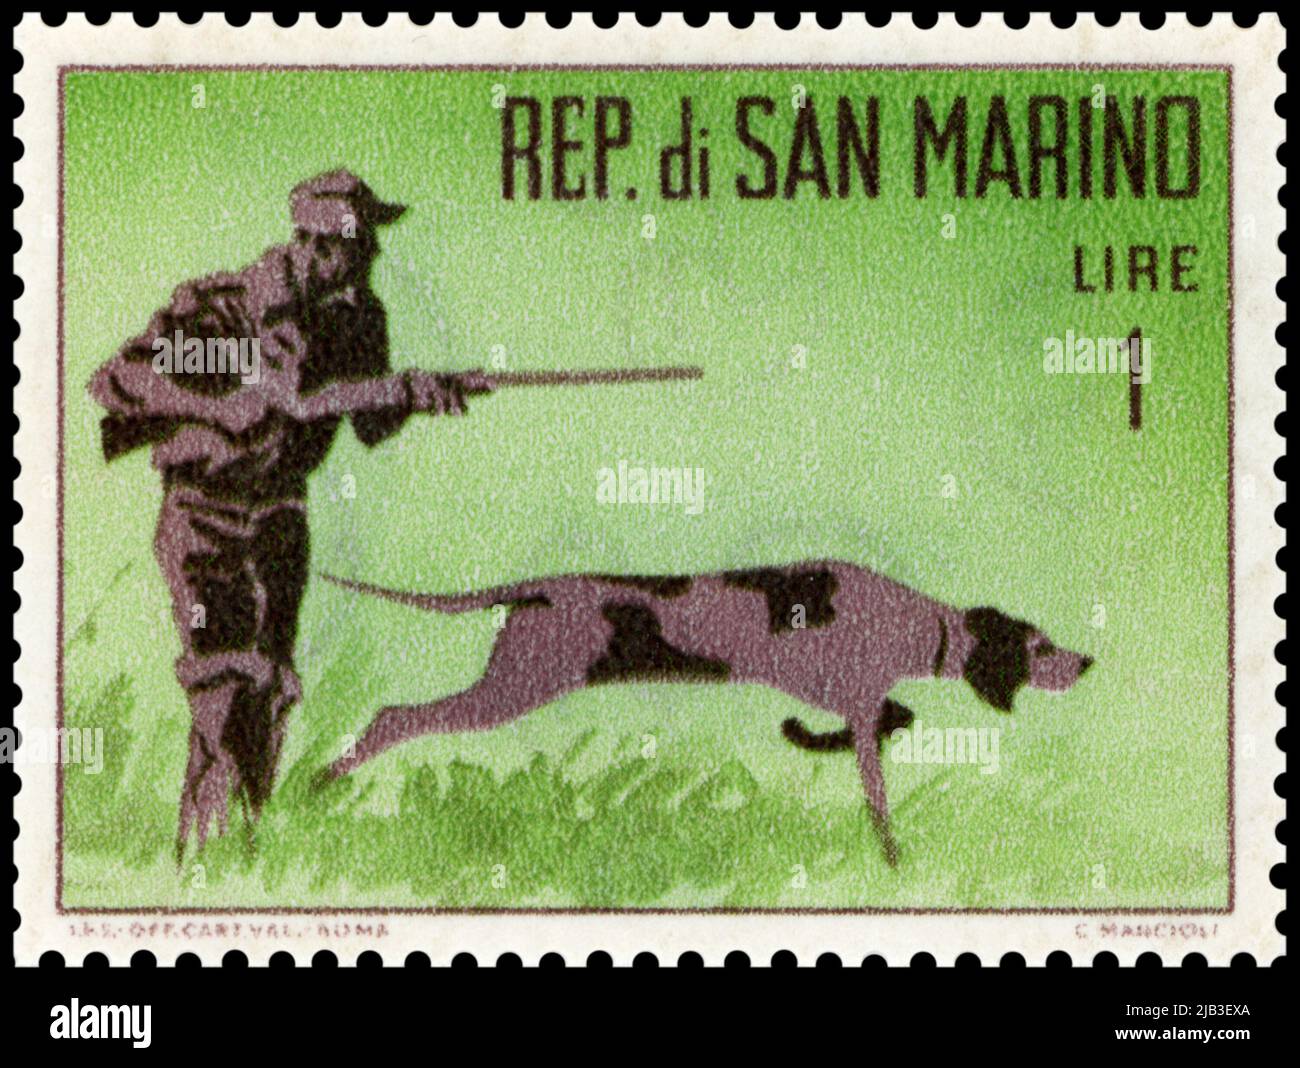 San Marino 1962 postage stamp features a hunter with his dog. Stock Photo